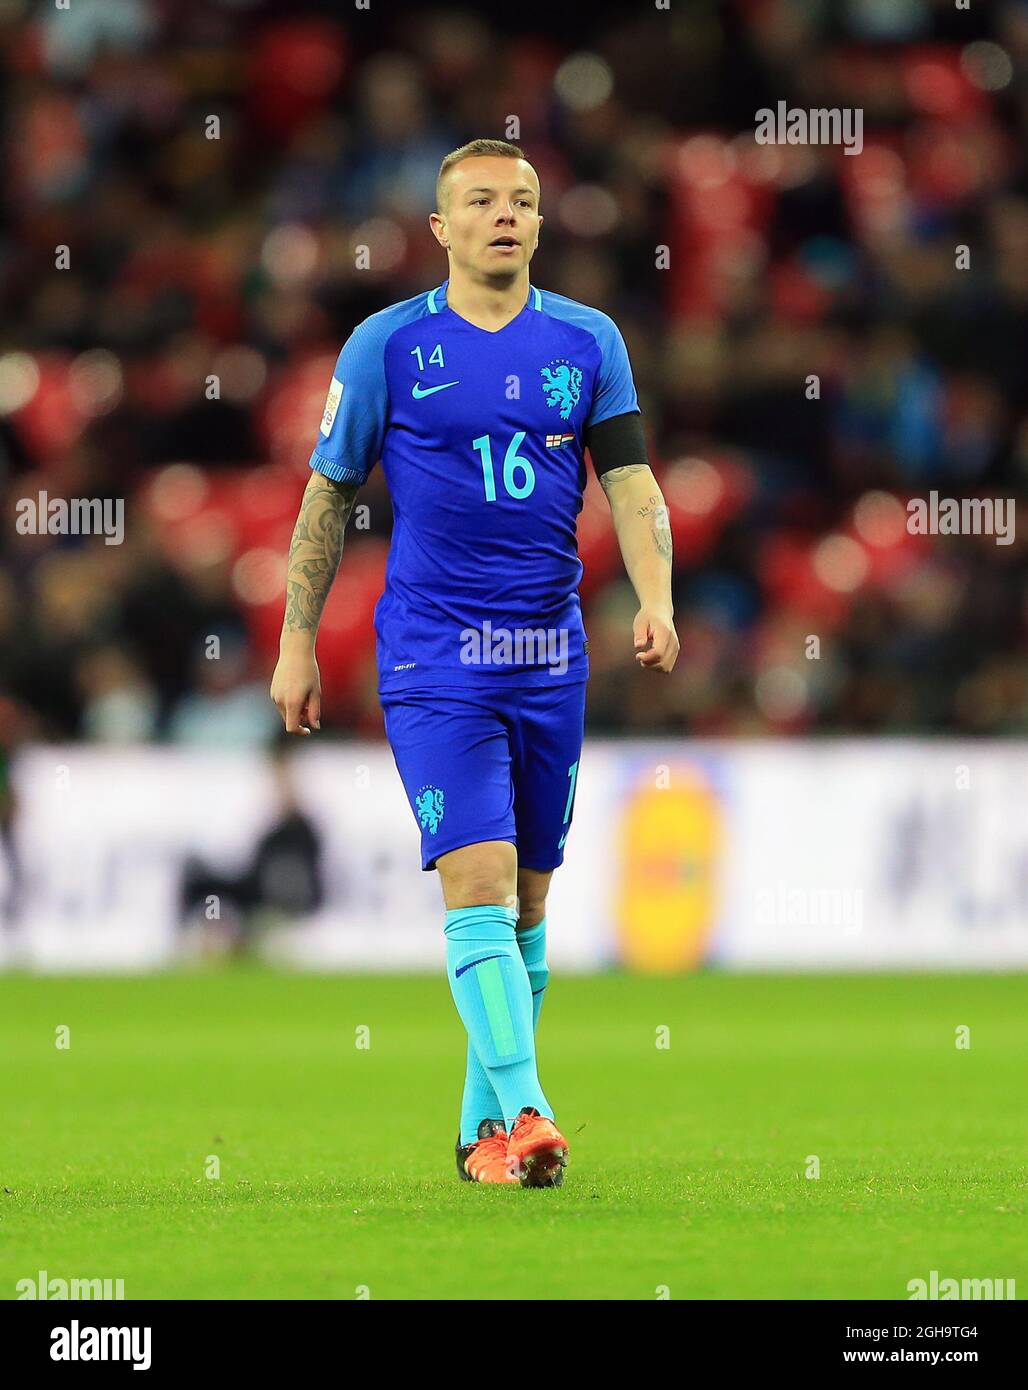 Netherland's Jordy Clasie in action during the International friendly match at Wembley.  Photo credit should read: David Klein/Sportimage via PA Images  Stock Photo